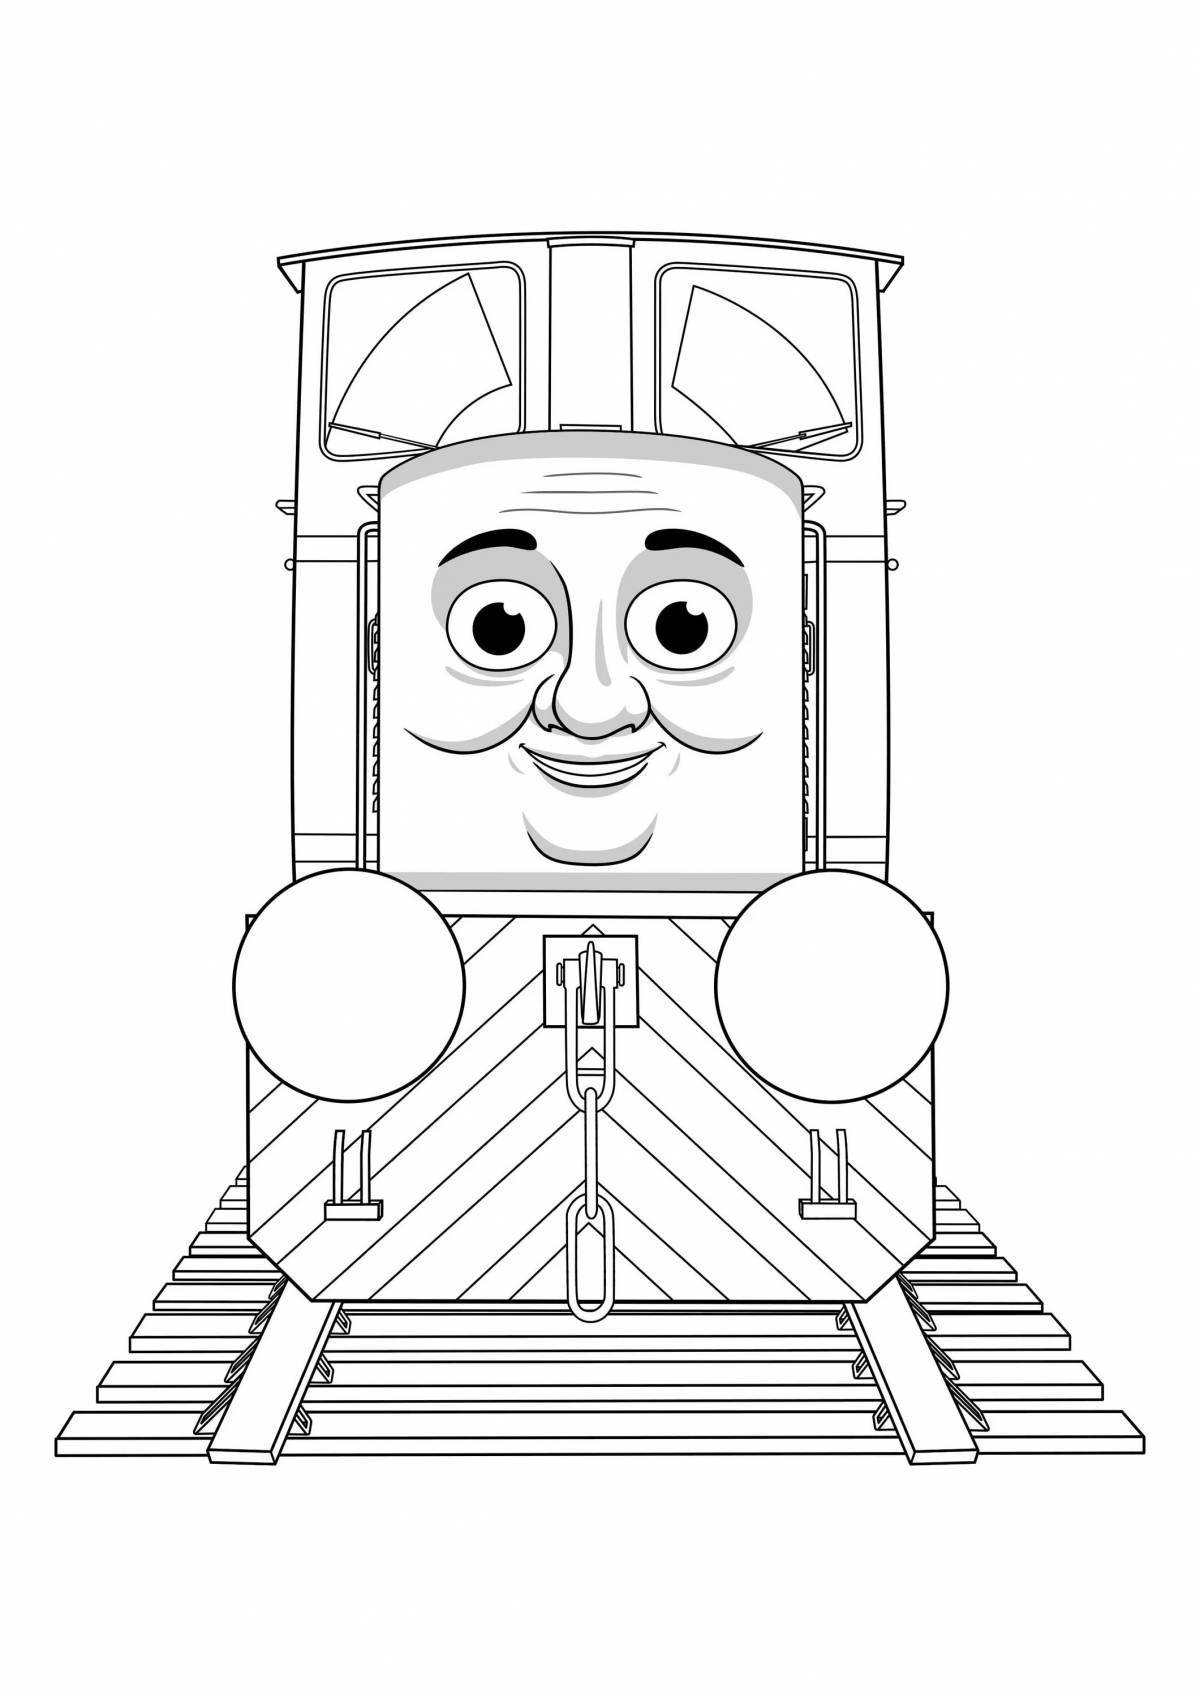 Amazing spider train coloring page